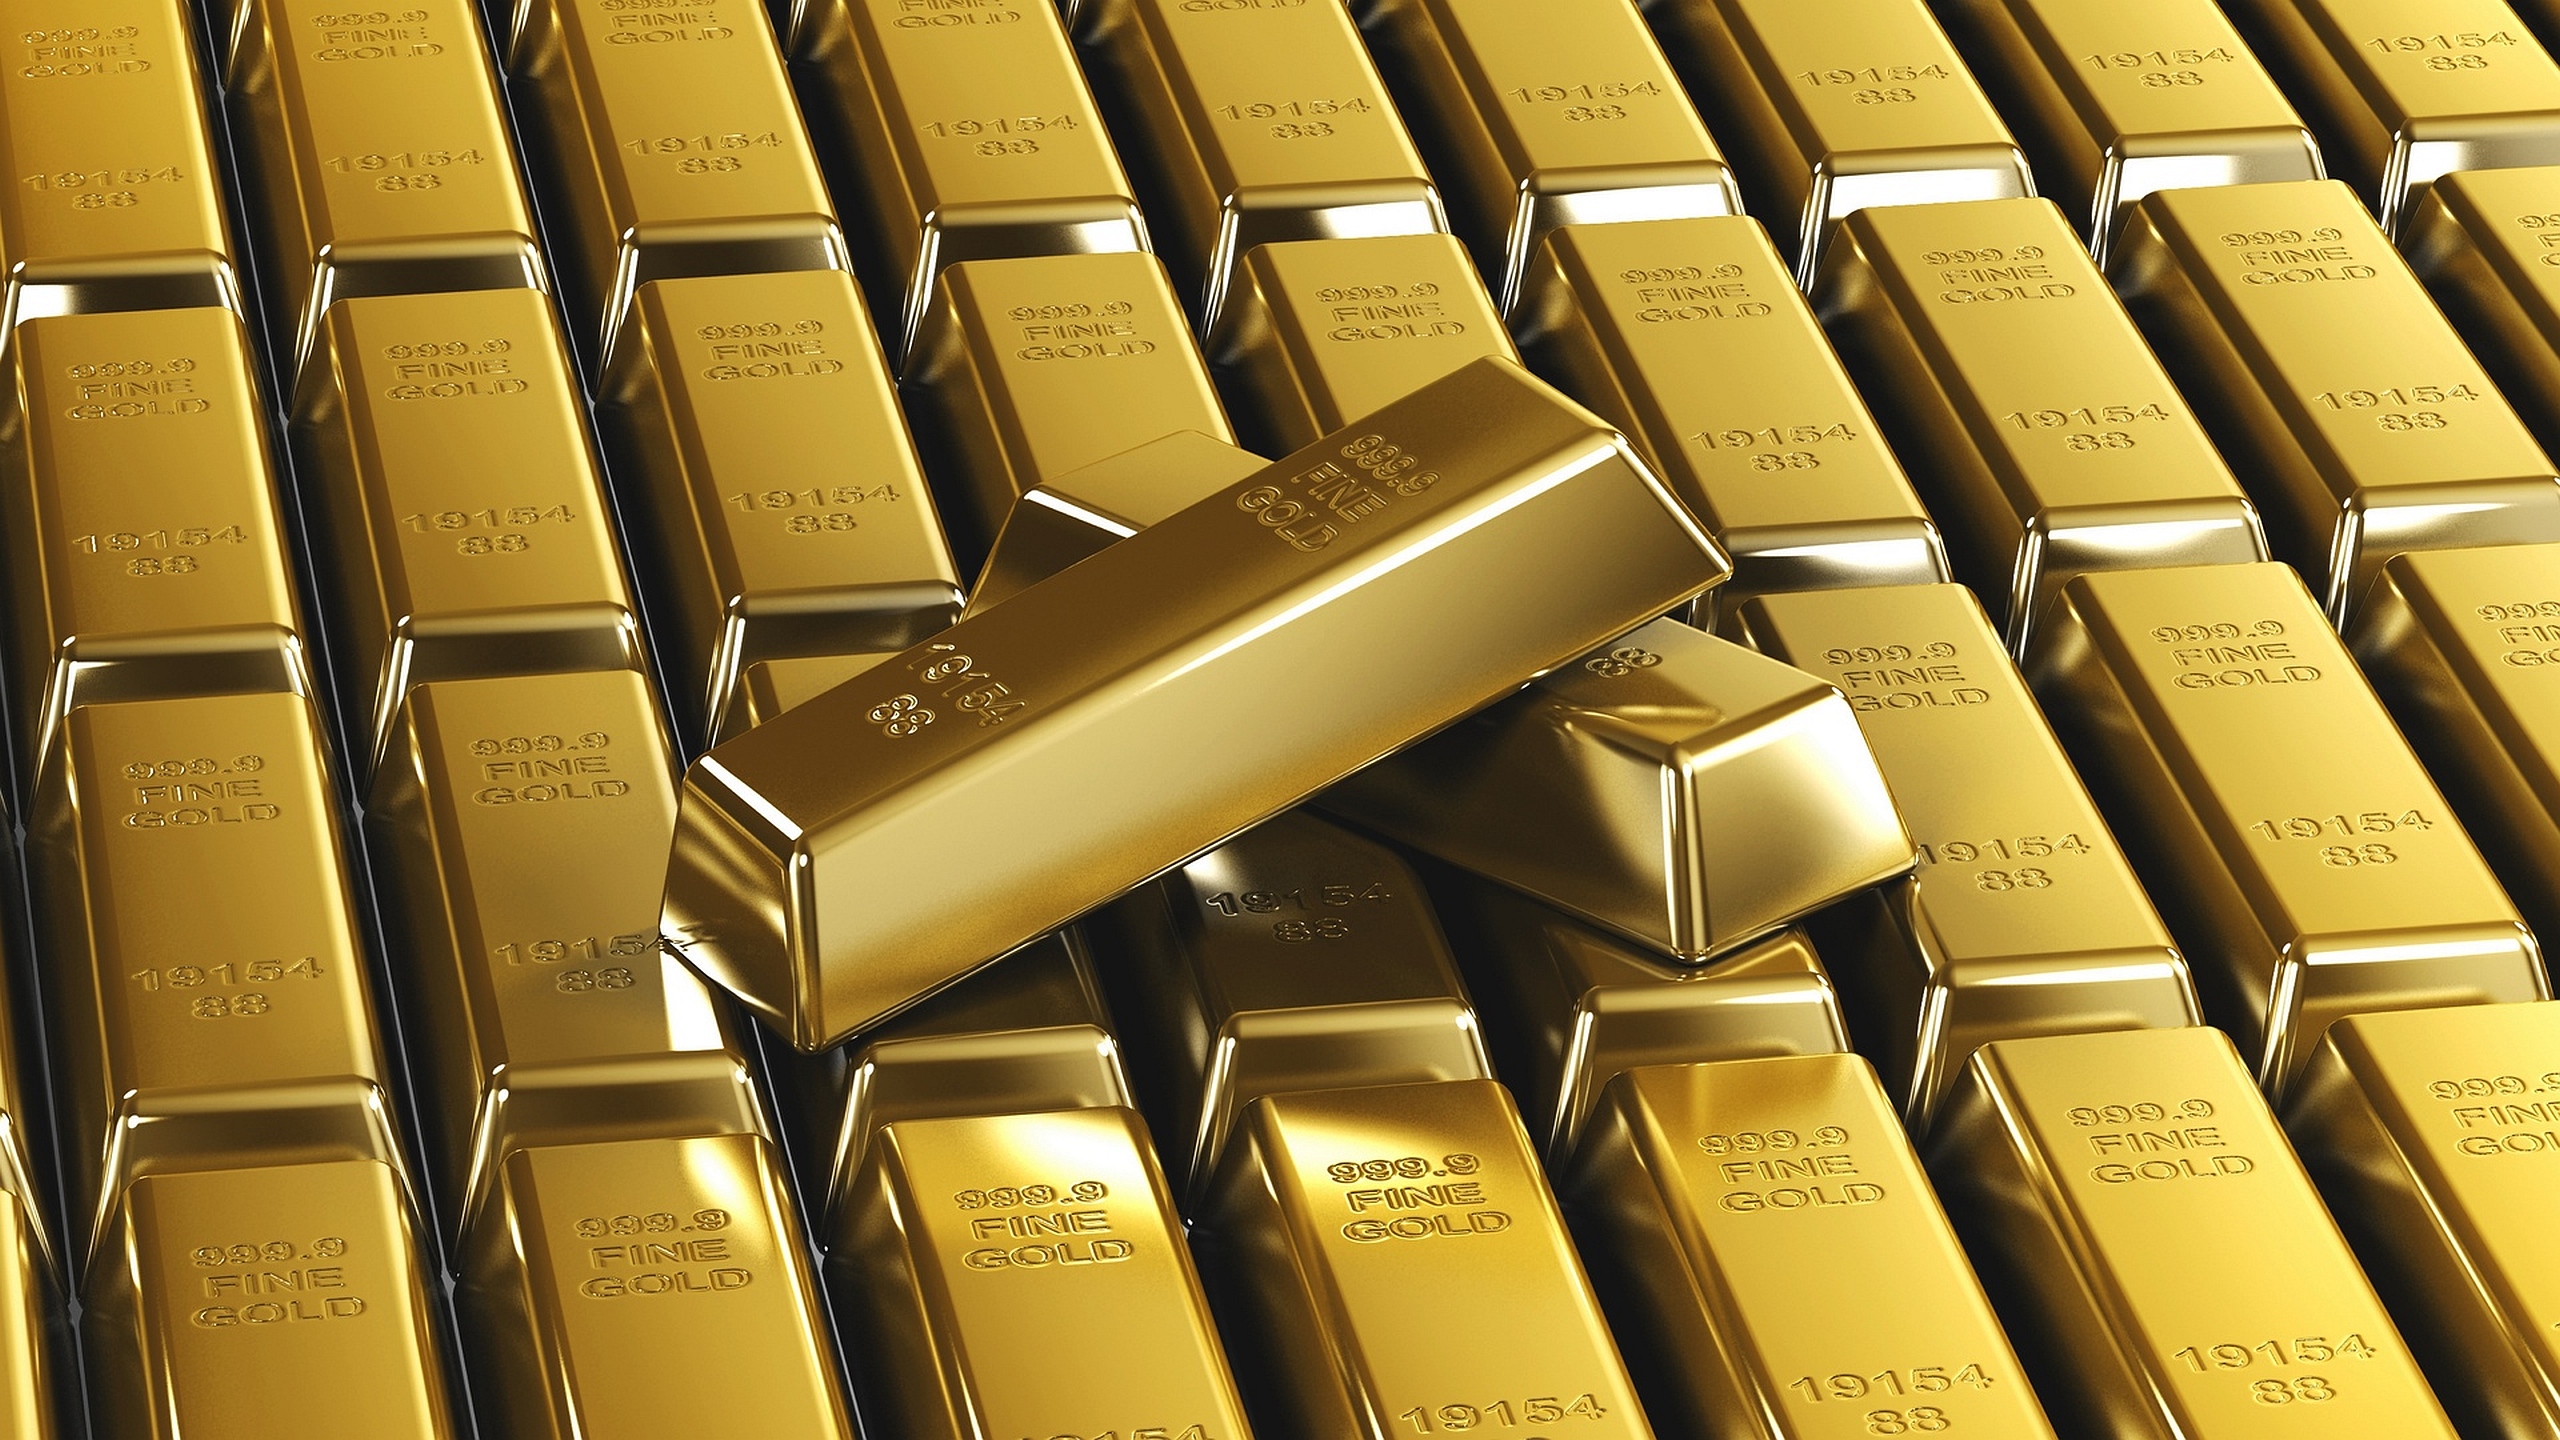 HD wallpaper collection commerce gold gold bars golden investment  luxury  Wallpaper Flare